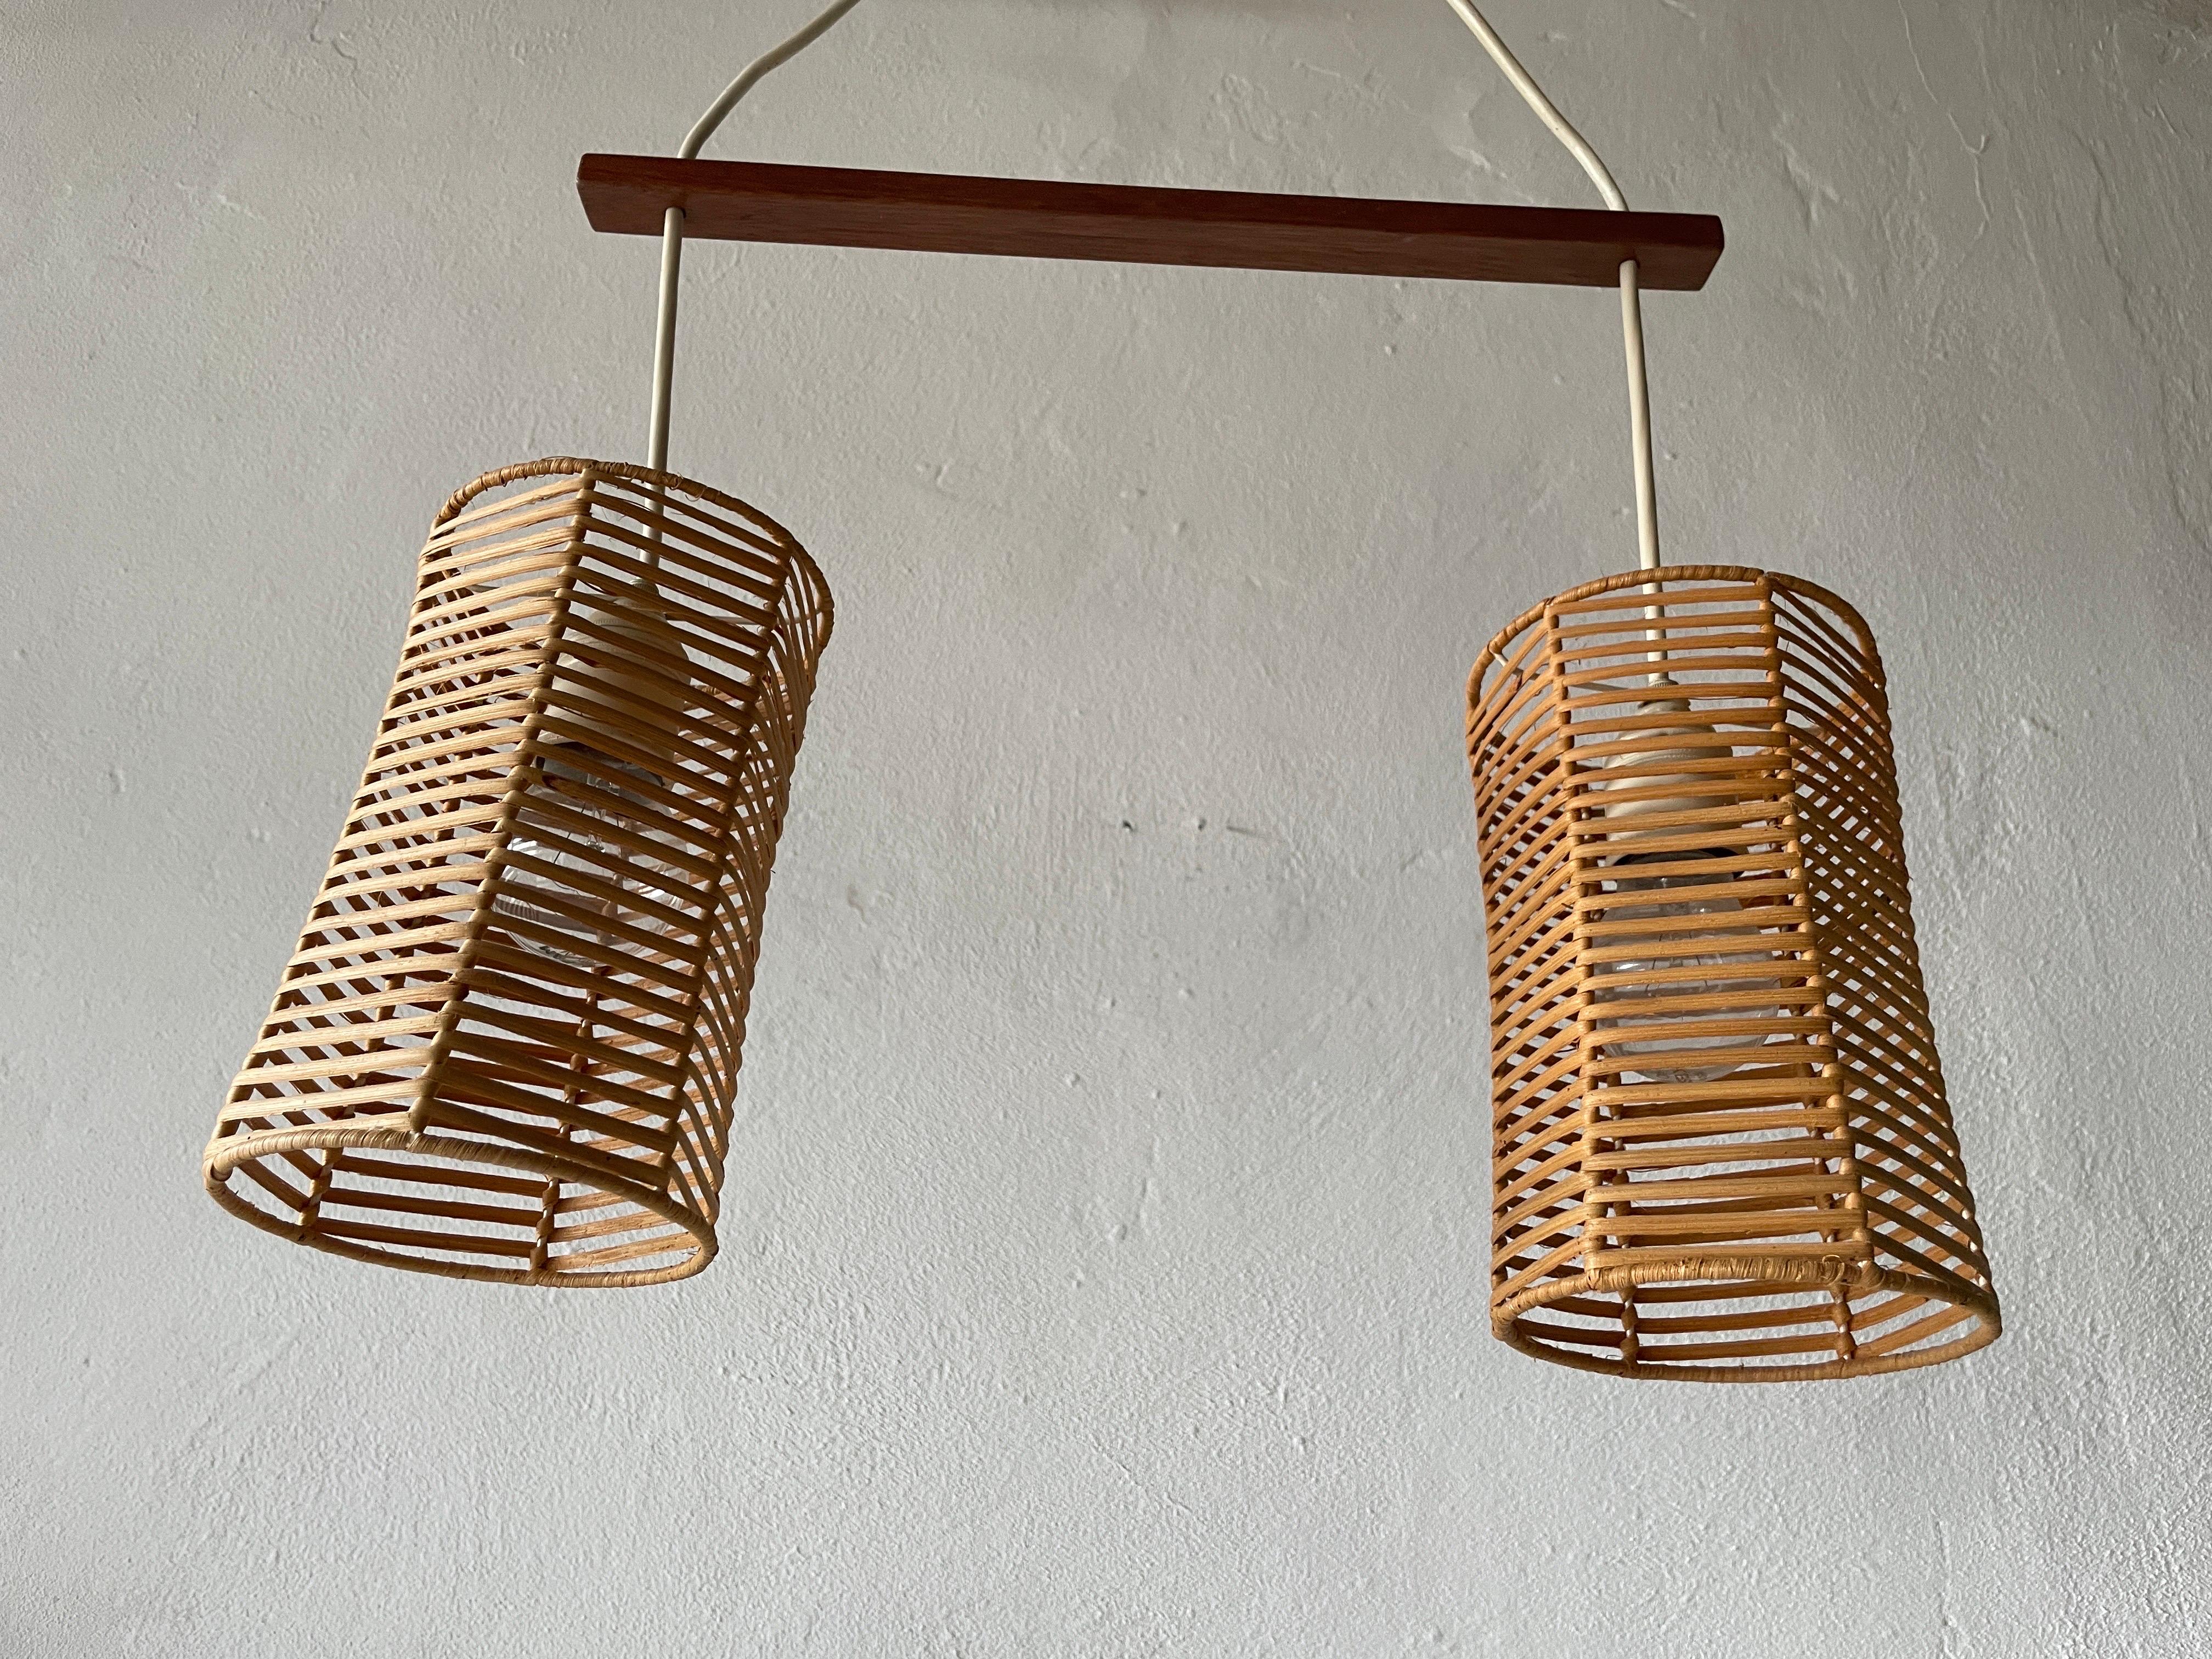 Double Shade Wicker and Wood Pendant Lamp, 1960s, Germany

Lampshade is in very good vintage condition.
No crack, no missed piece.
Original canopy.

This lamp works with 2x E27 light bulb. Max 100W
Wired and suitable to use with 220V and 110V for